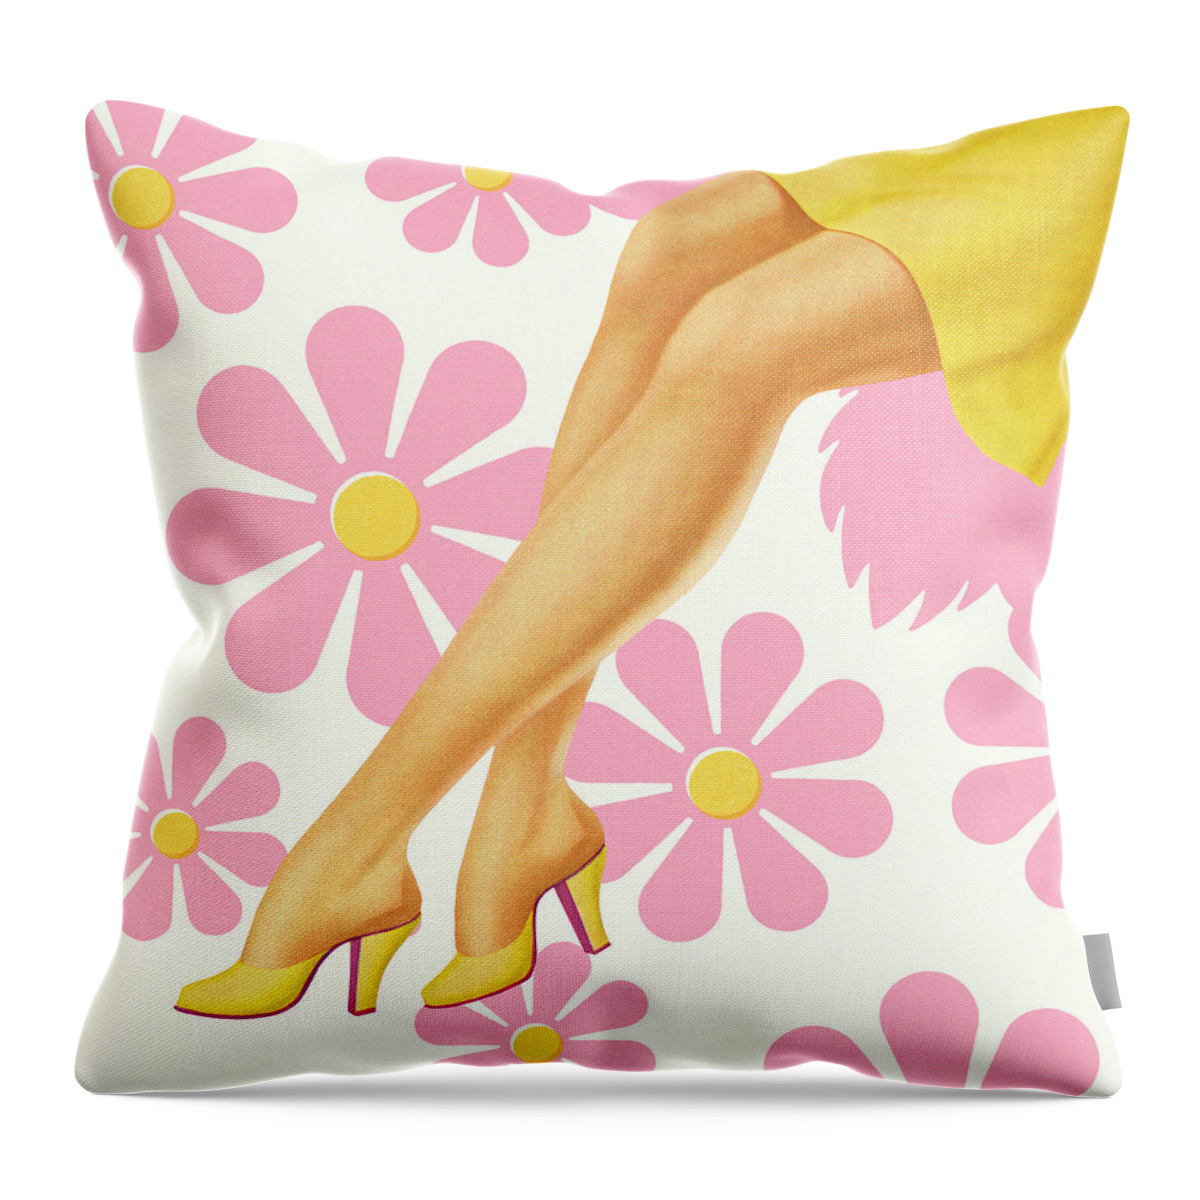 Adult Throw Pillow featuring the drawing Woman's Legs by CSA Images